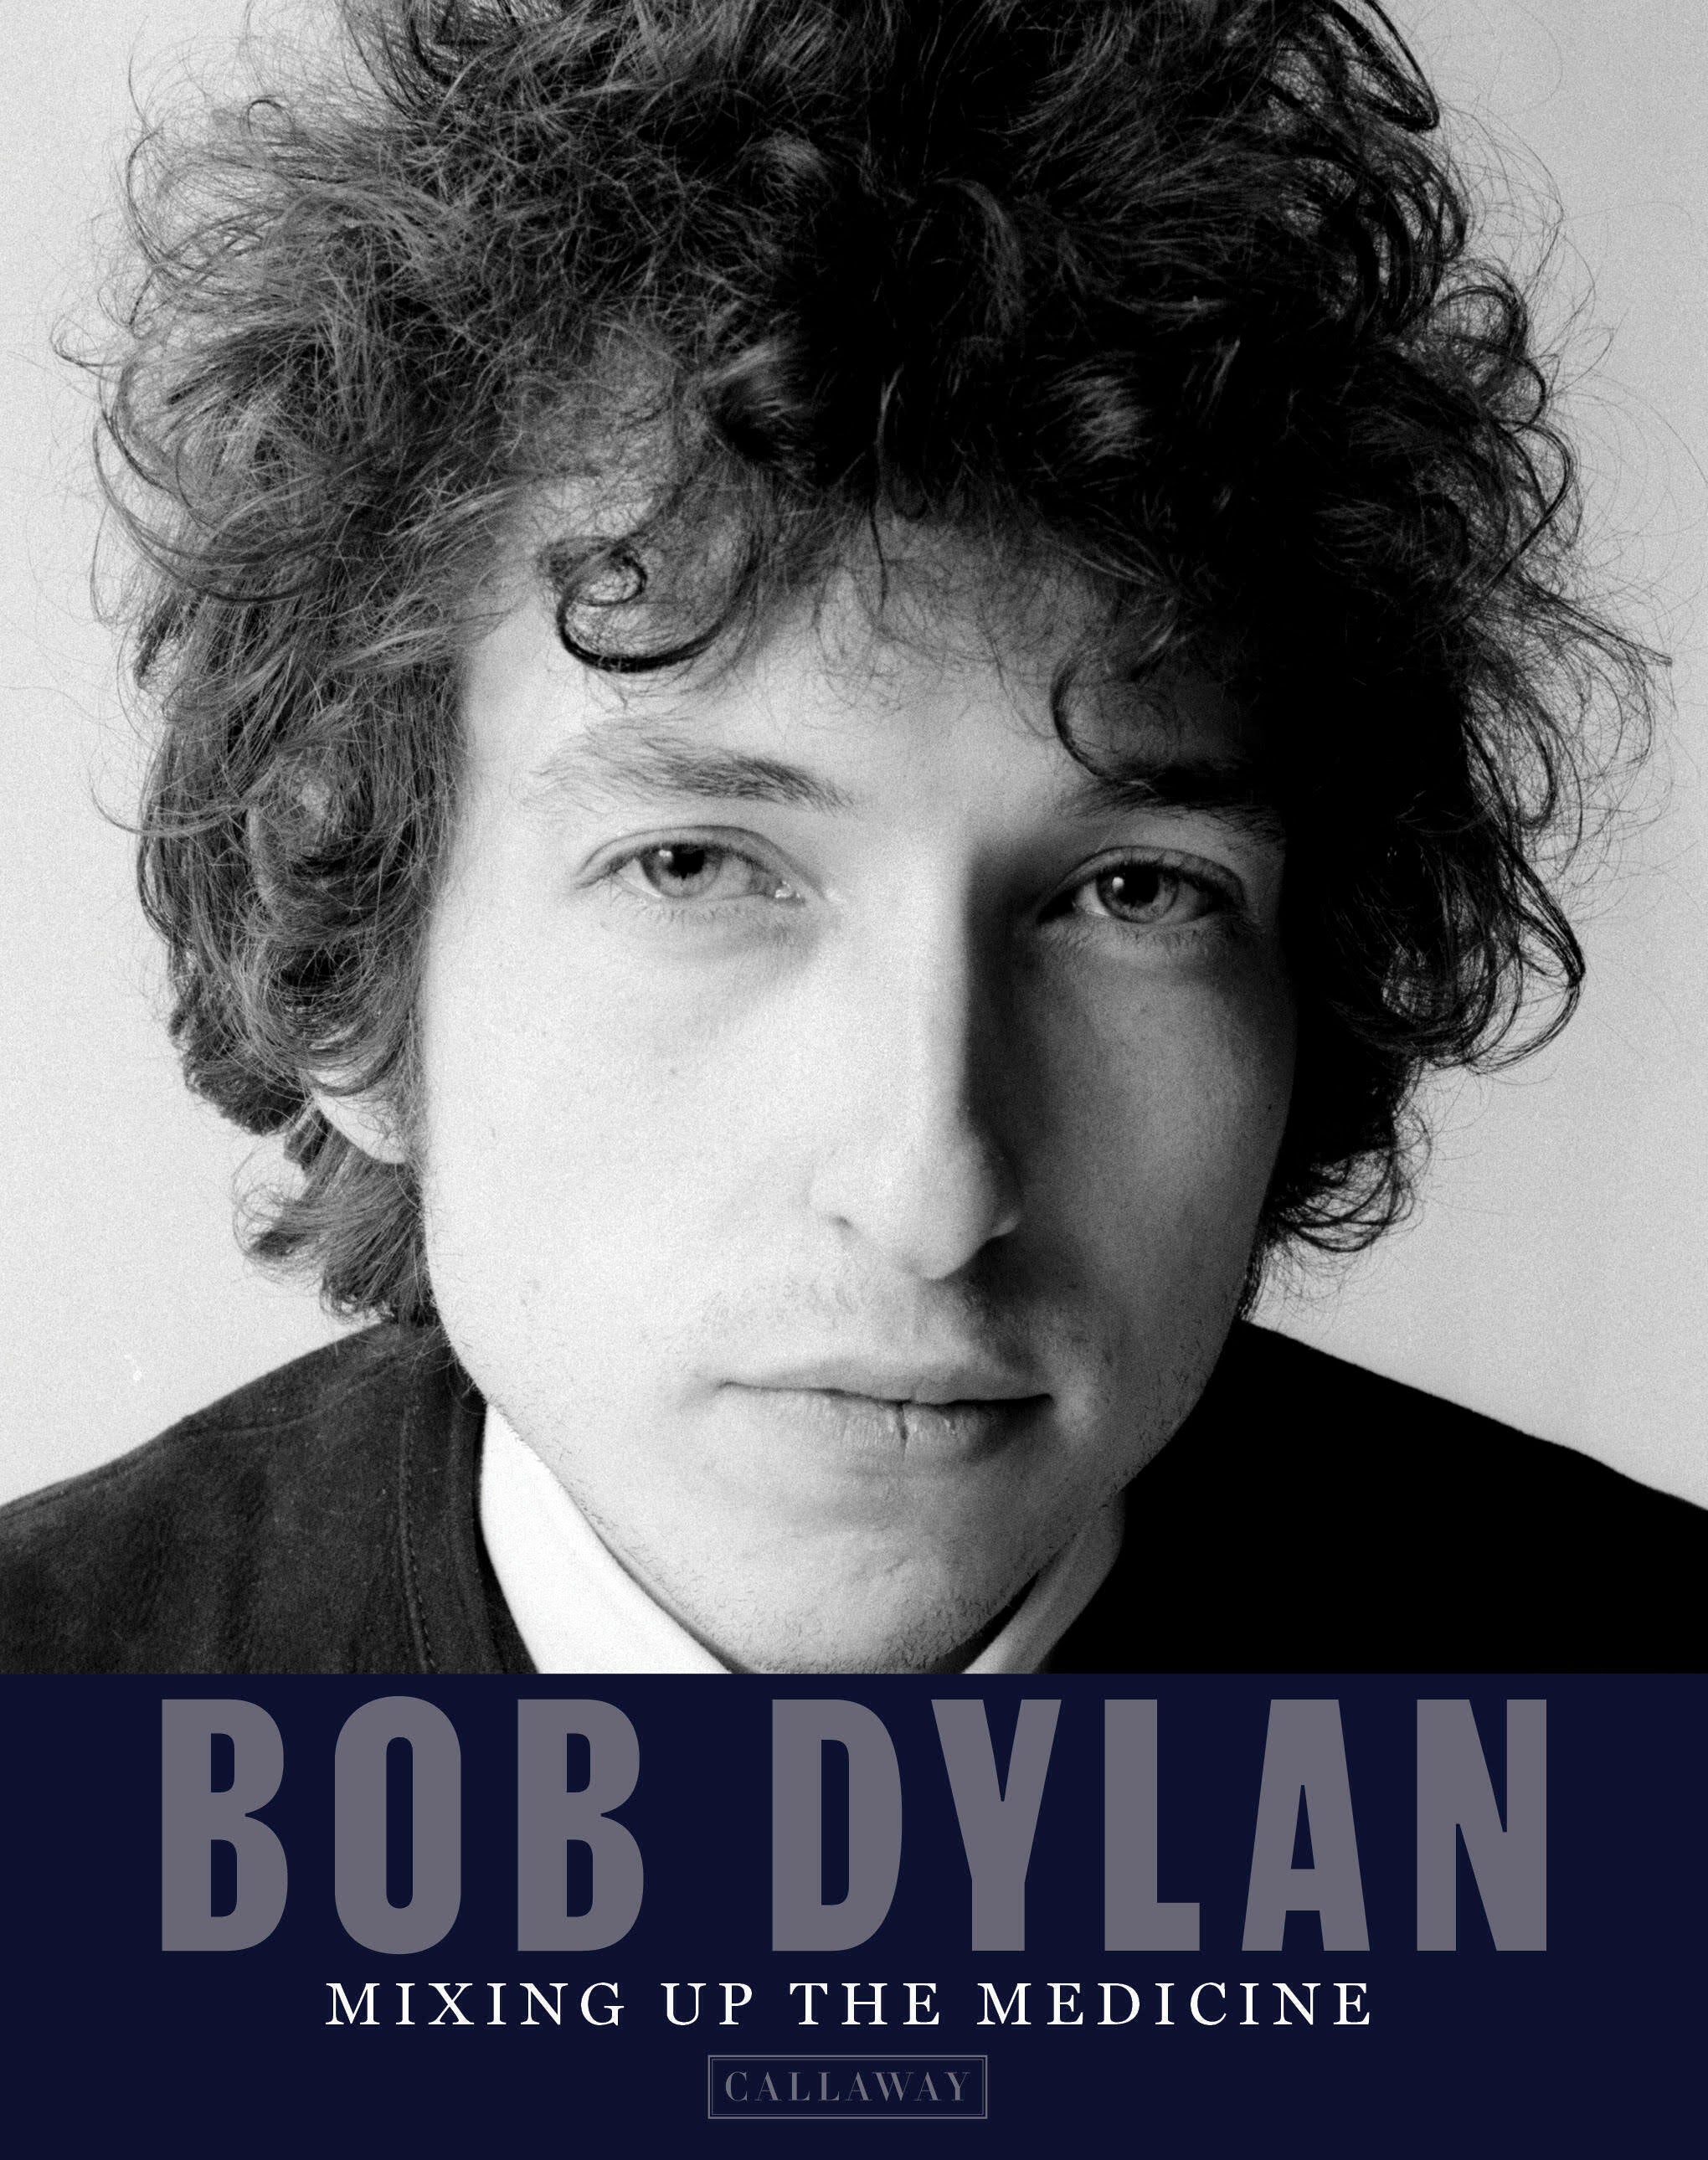 New book on Bob Dylan will feature hundreds of rare images The